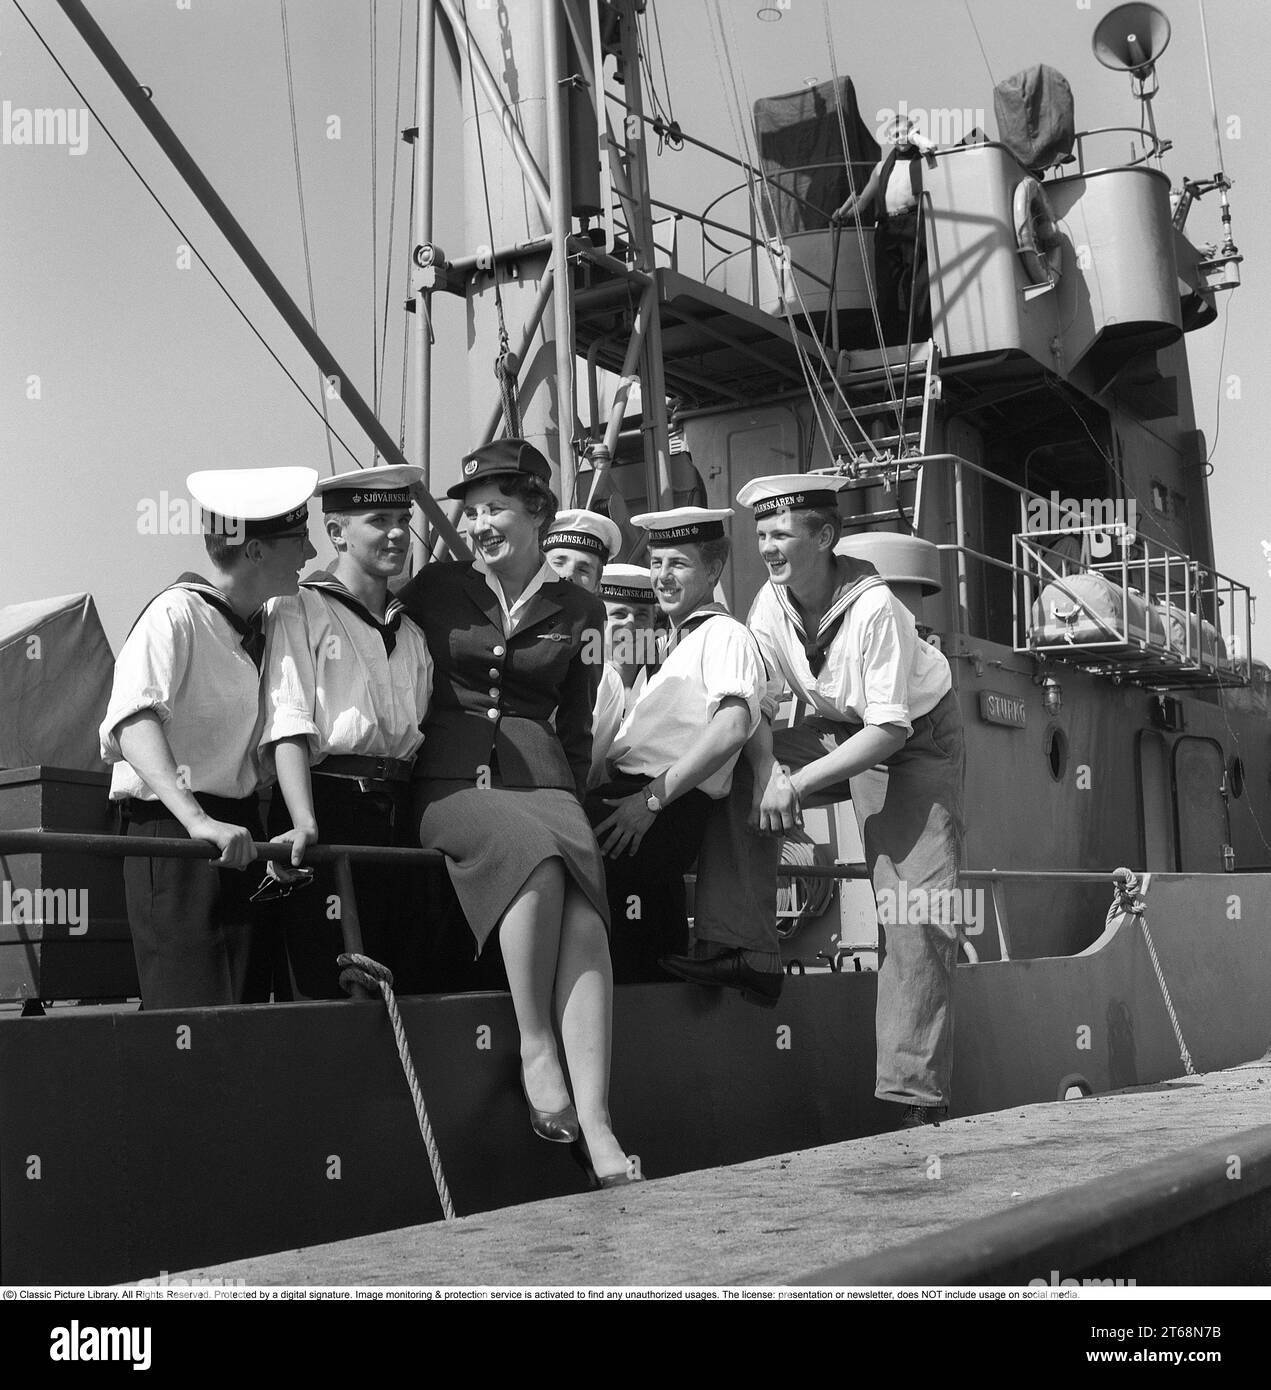 In the 1950s. A young woman in uniform at the dock surrounded by sailors from the crew of the ship Sturkö, which belongs to the Swedish Navy. The picture was taken in Visby on the island of Gotland, Sweden in 1959. Kristoffersson ref CG40-5 Stock Photo